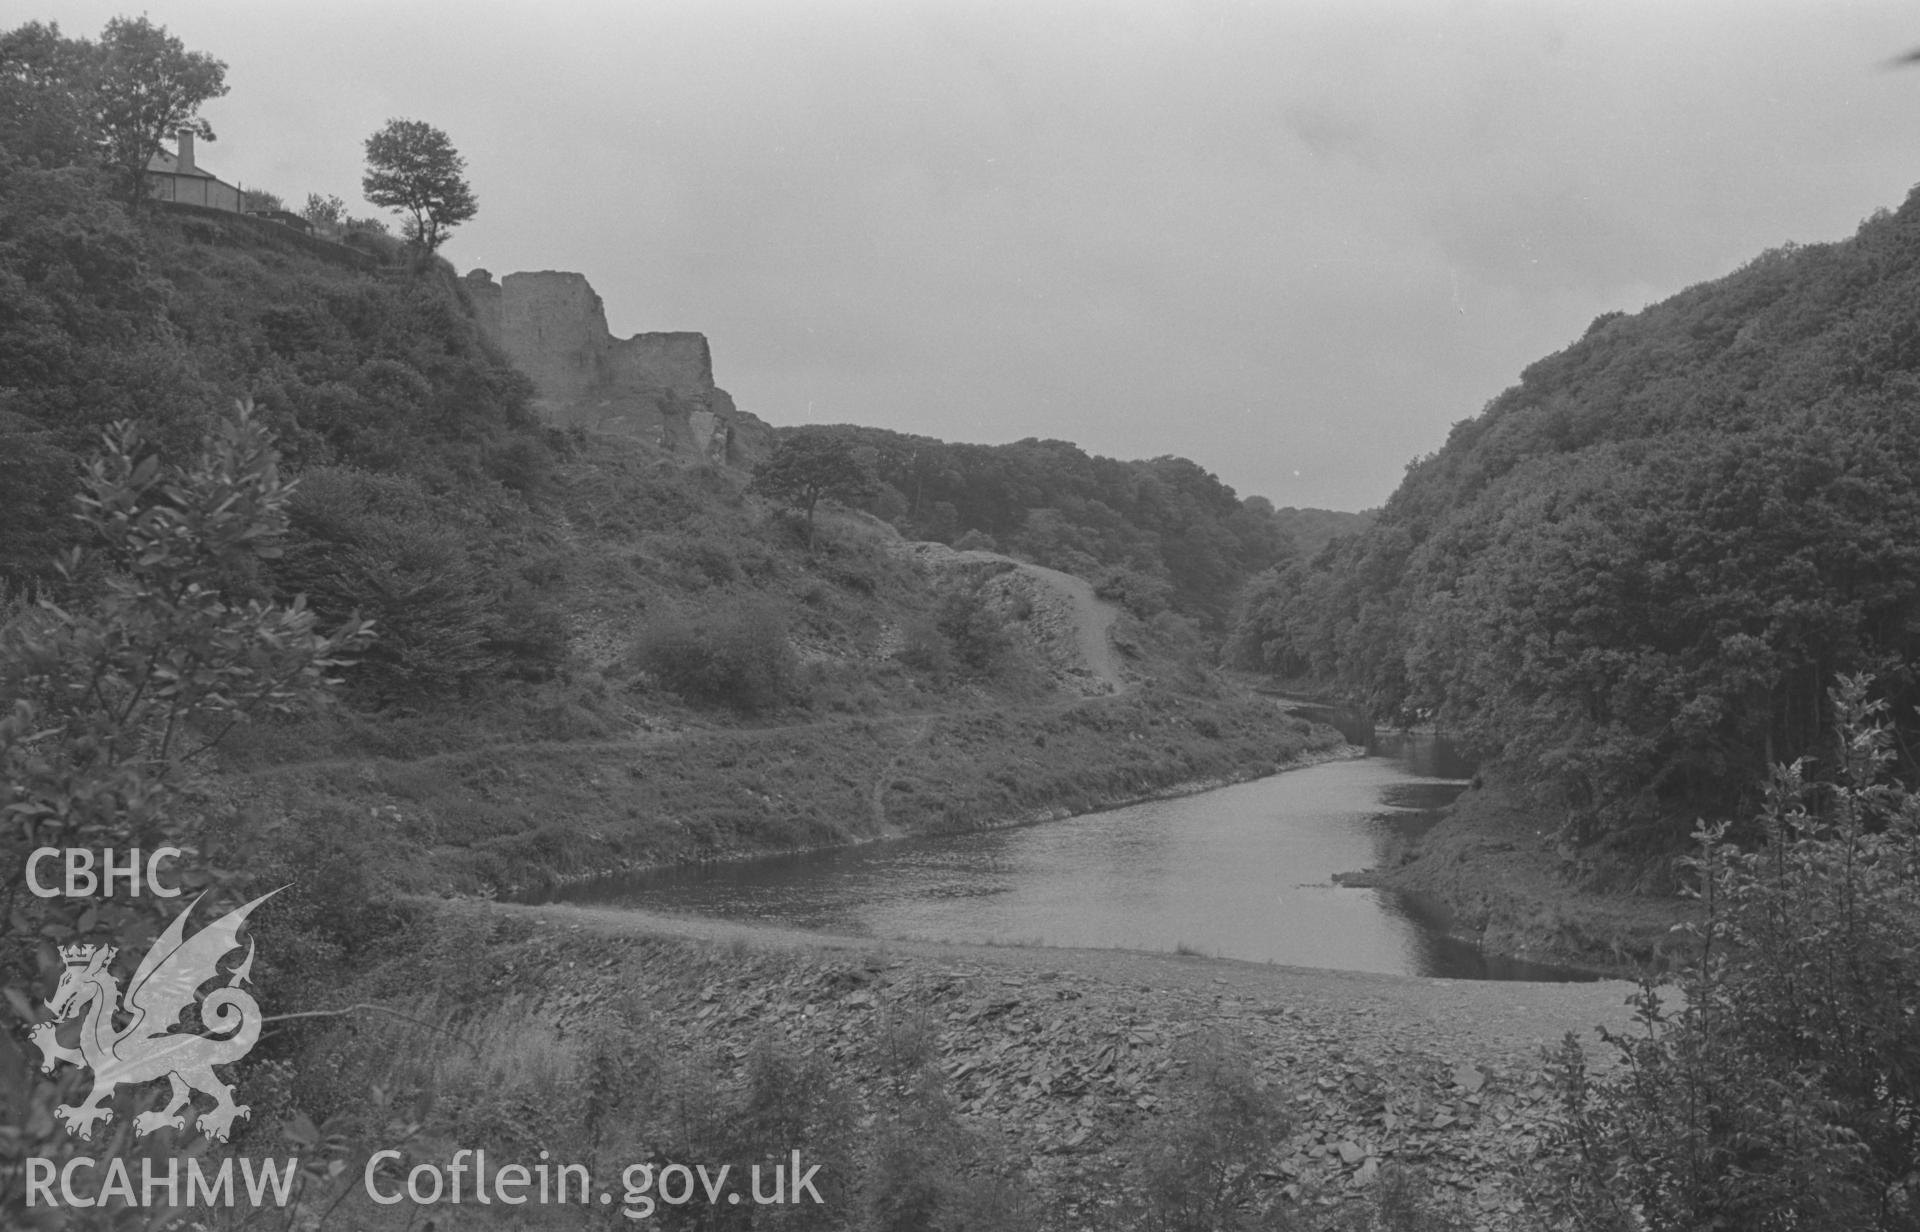 Digital copy of a black and white negative showing Cilgerran castle overlooking the Teifi, with Coedmore woods on the right. Photographed in September 1963 by Arthur O. Chater from Grid Reference SN 1973 4296, looking north west.